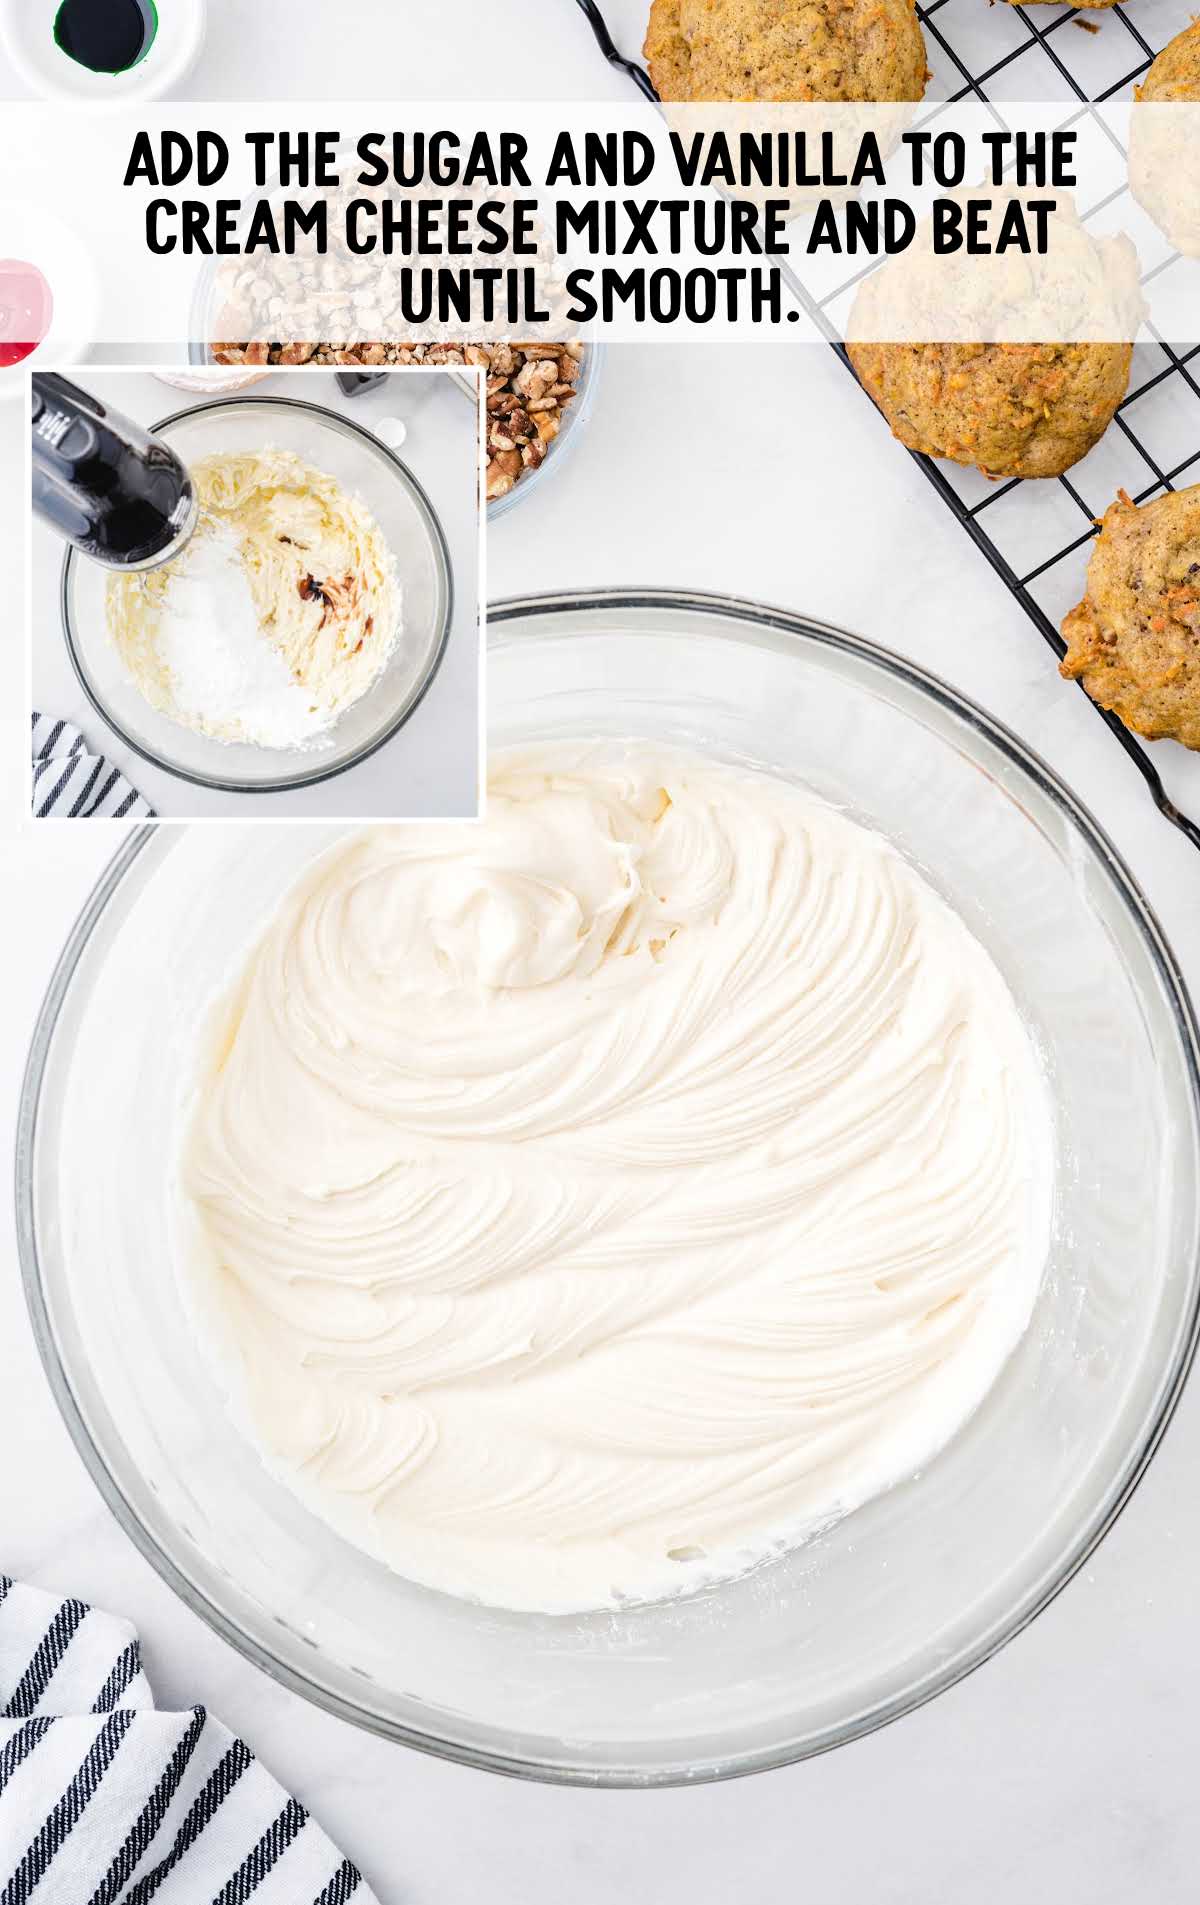 sugar and vanilla added to the cream cheese mixture and being blended together in a bowl